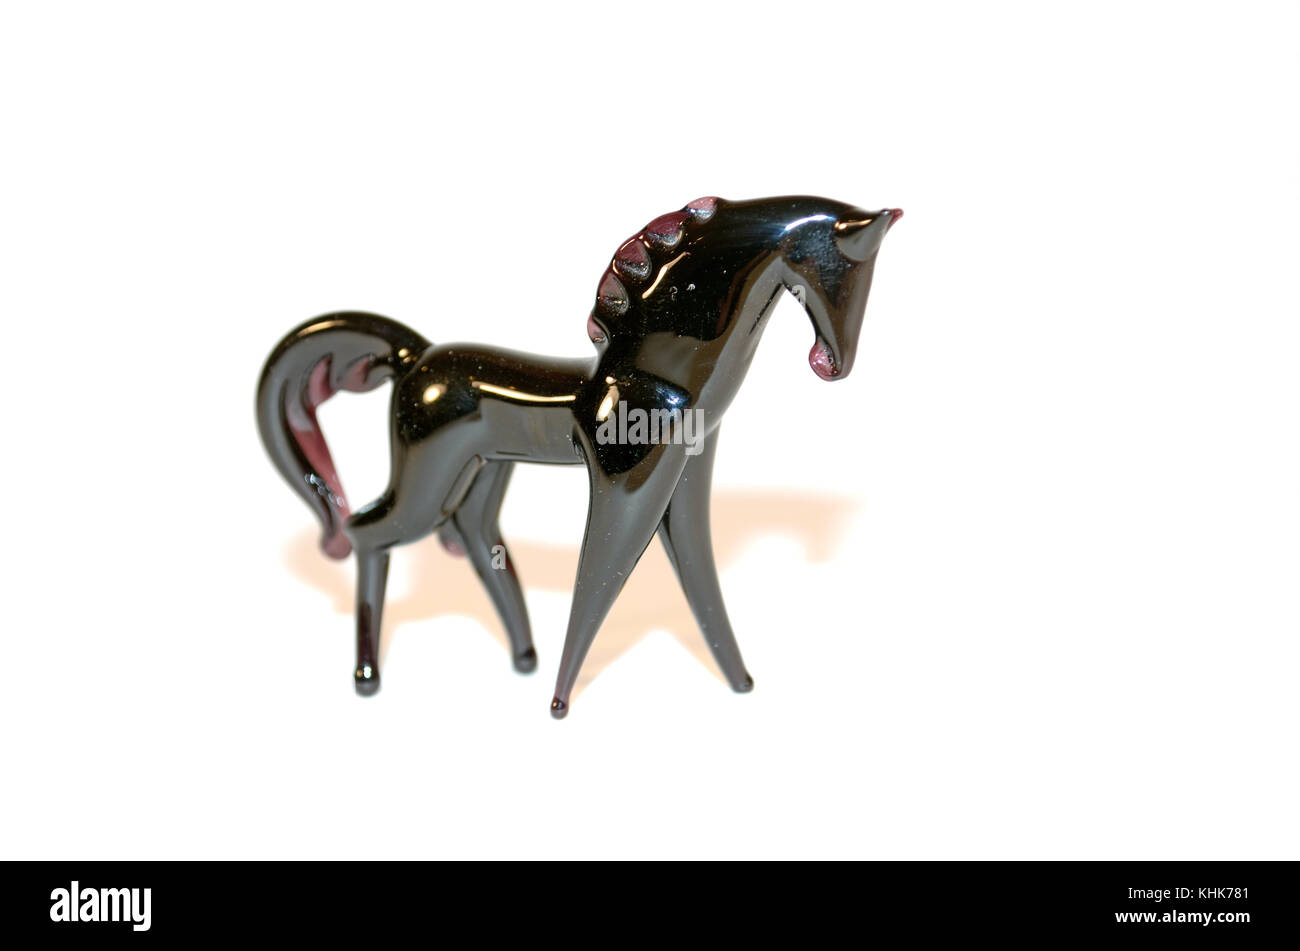 Miniature glass horse contrasted on a white background. Stock Photo